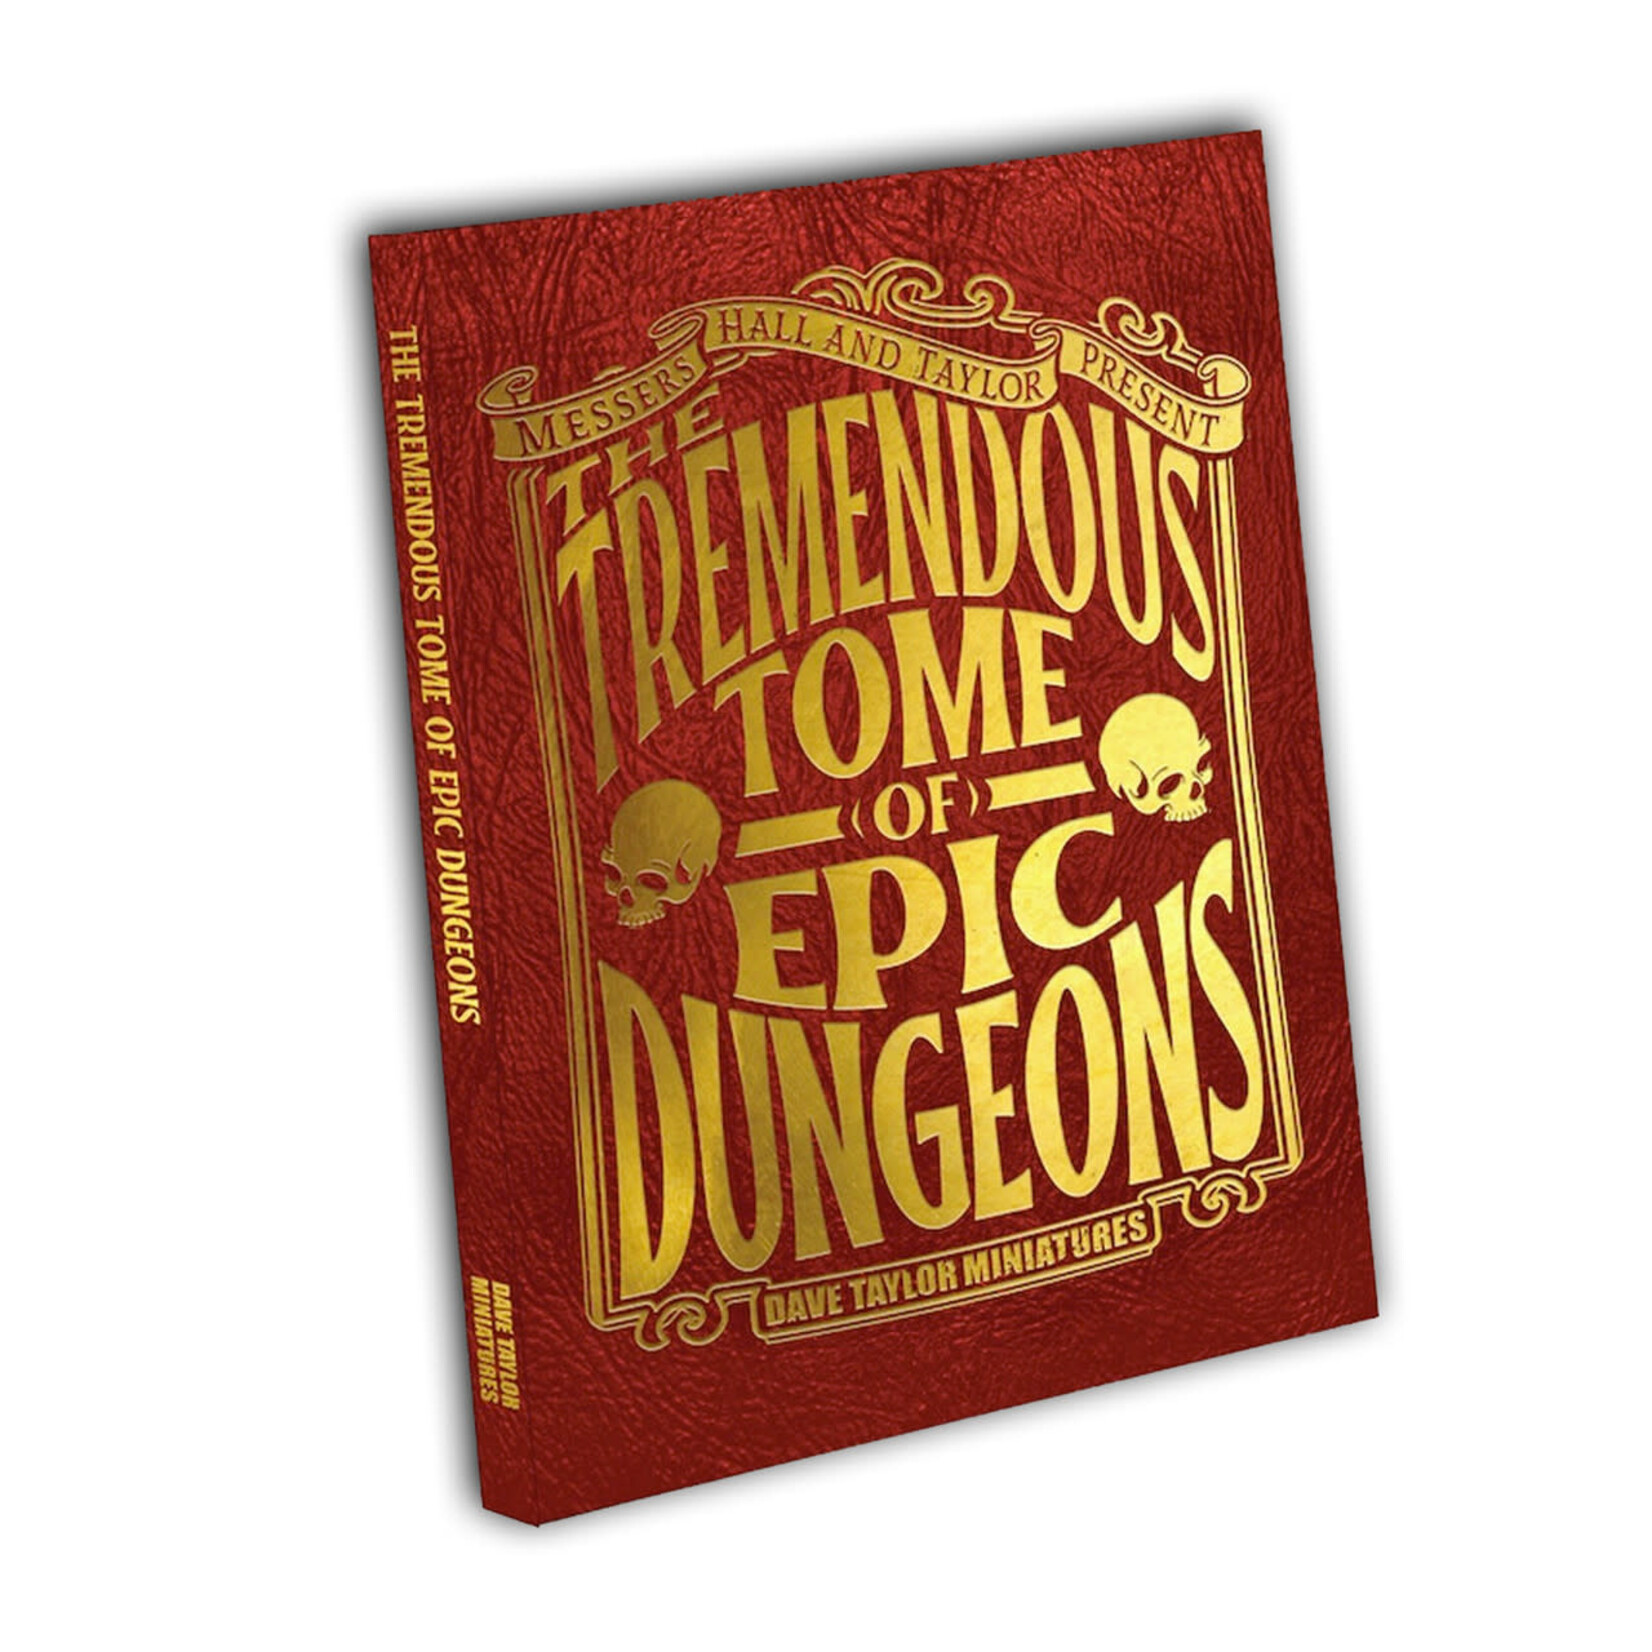 Dave Taylor Miniatures The Tremendous Tome of Epic Dungeons